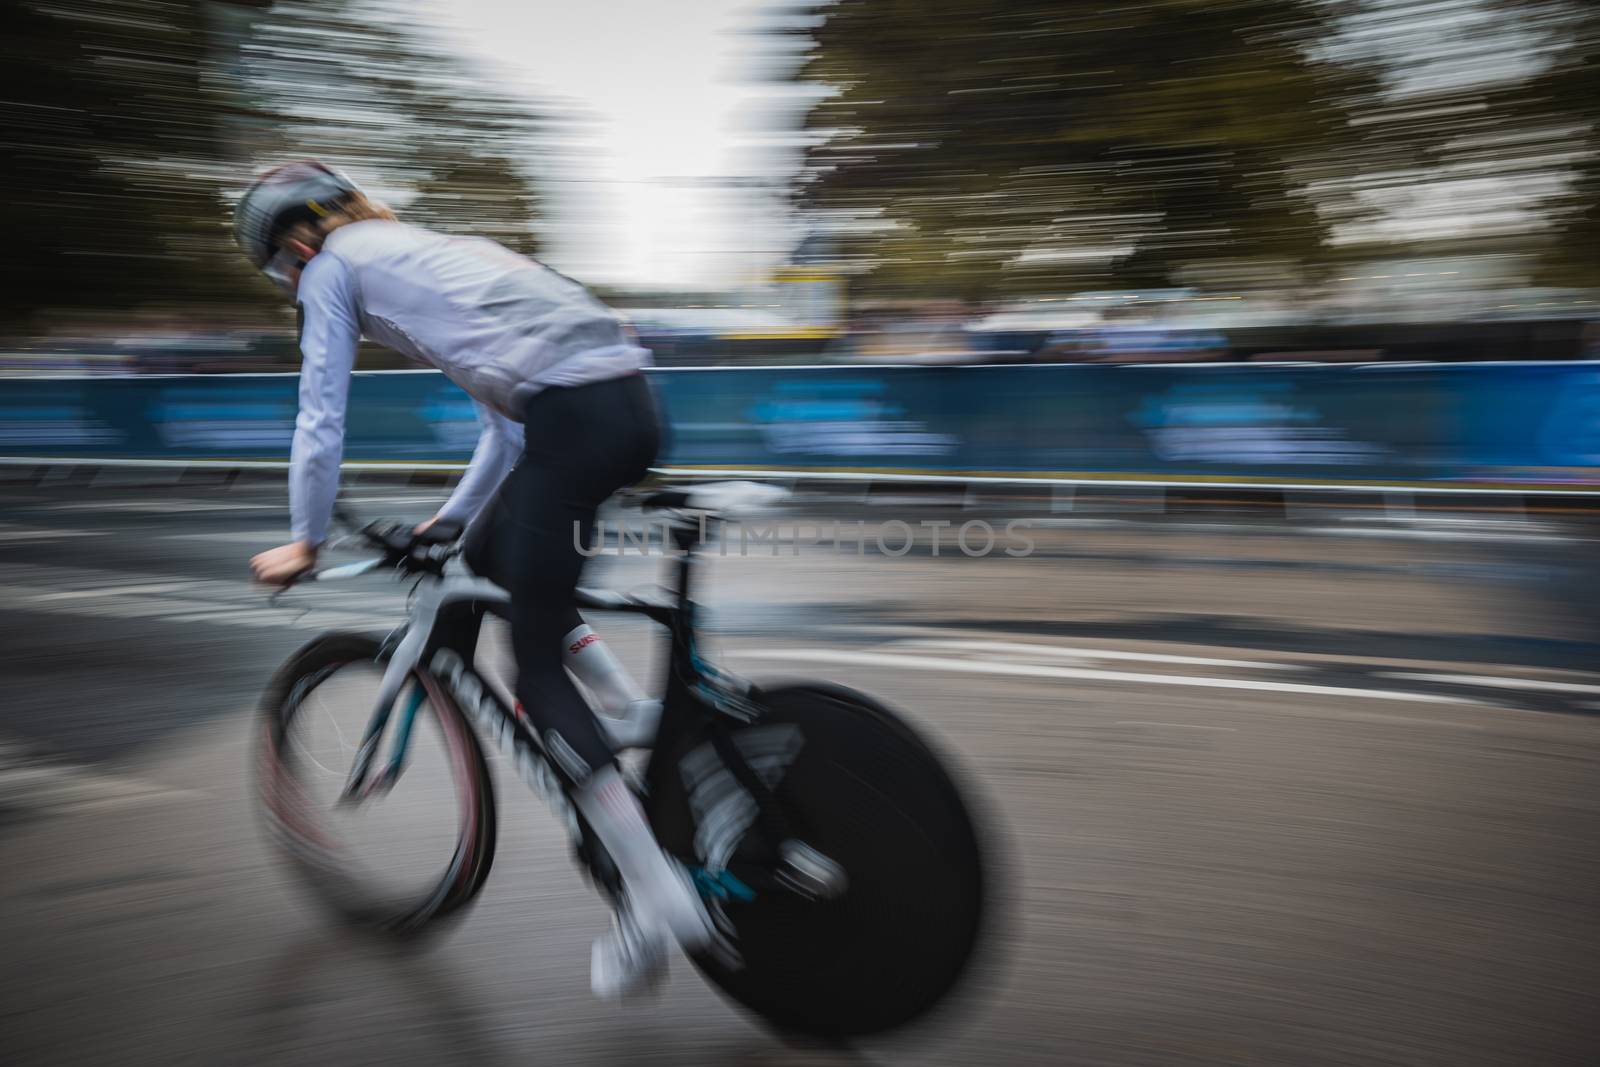 UCI Harrogate 2019 Cycling Event by samULvisuals